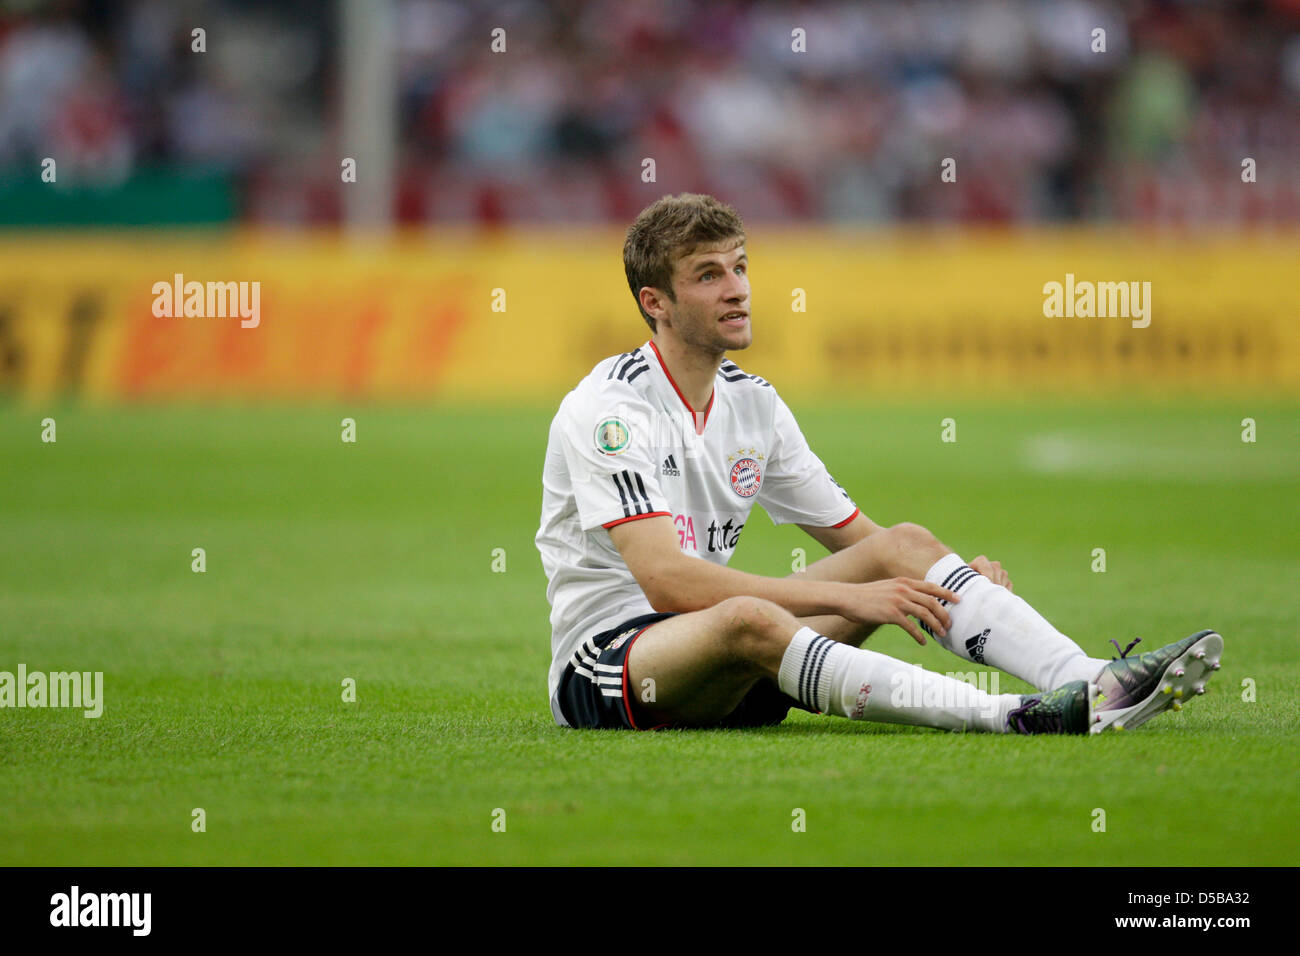 Munich's Thomas Mueller sits on the field during DFB Cup 1st round match Germania Windeck vs FC Bayern Munich in Cologne, Germany, 16 August 2010. Photo: Rolf Vennenbernd Stock Photo